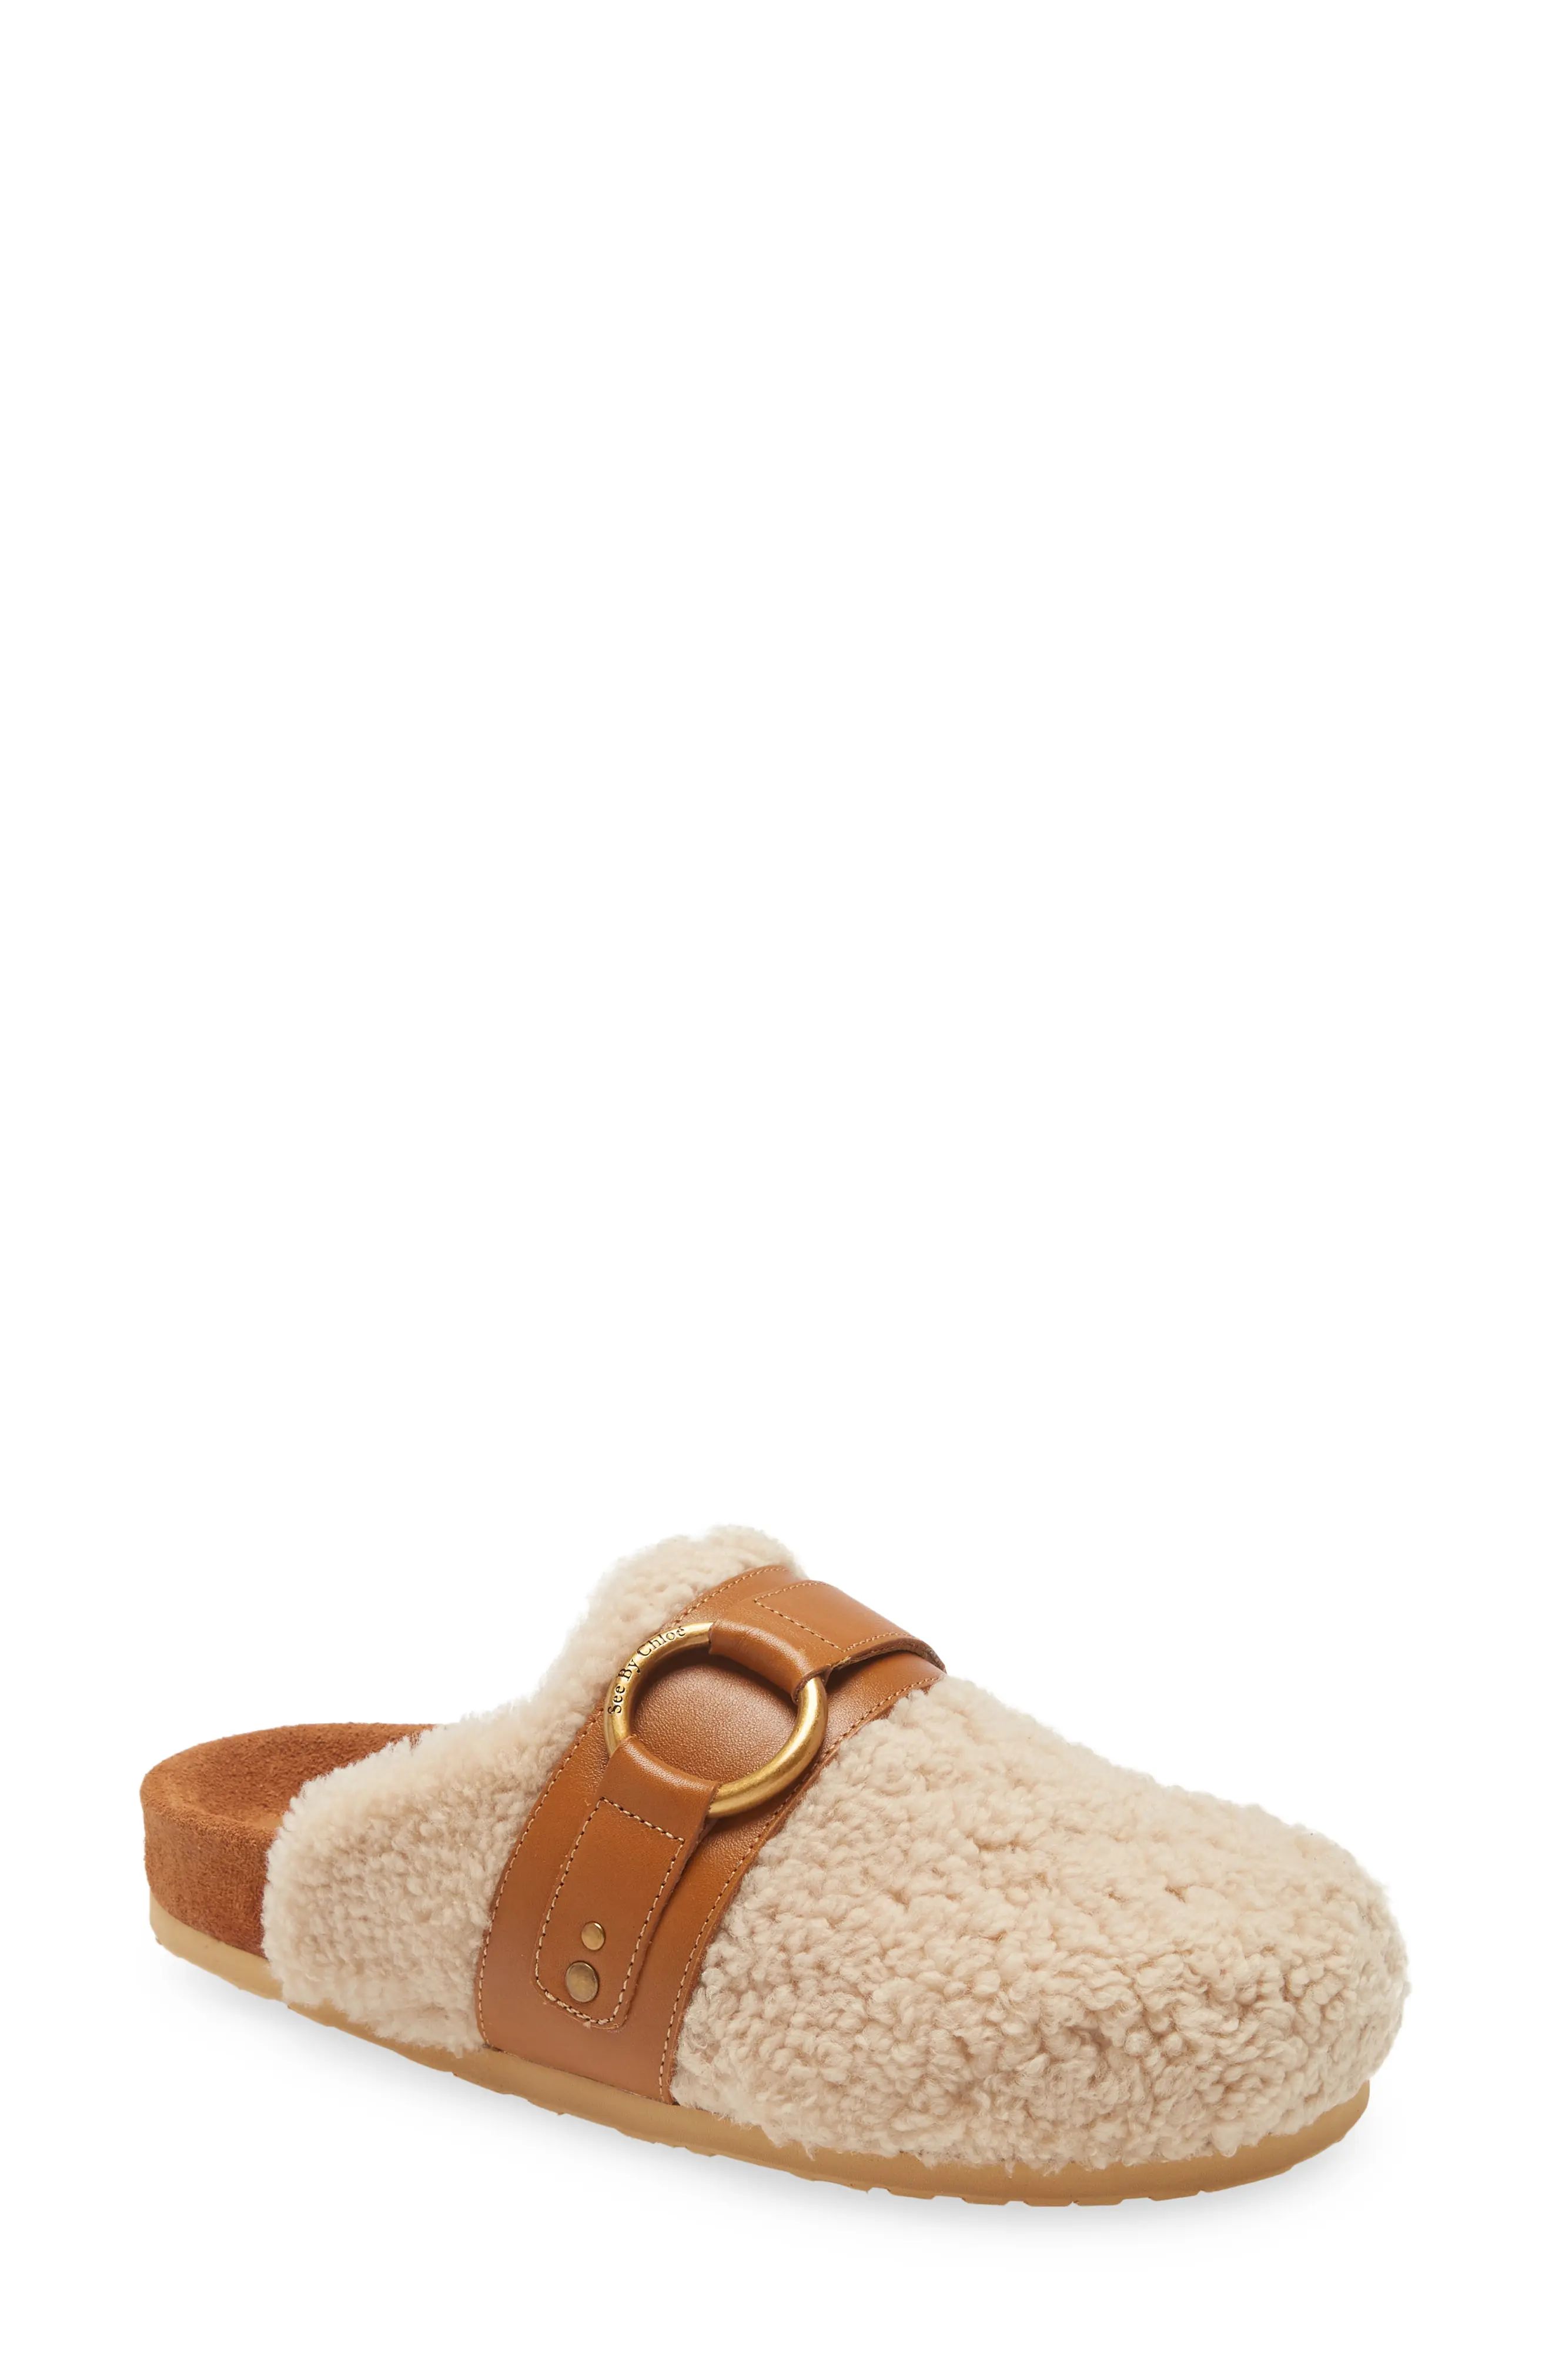 See by Chloe Gema Genuine Shearling Mule, Size 6Us in Natural at Nordstrom | Nordstrom